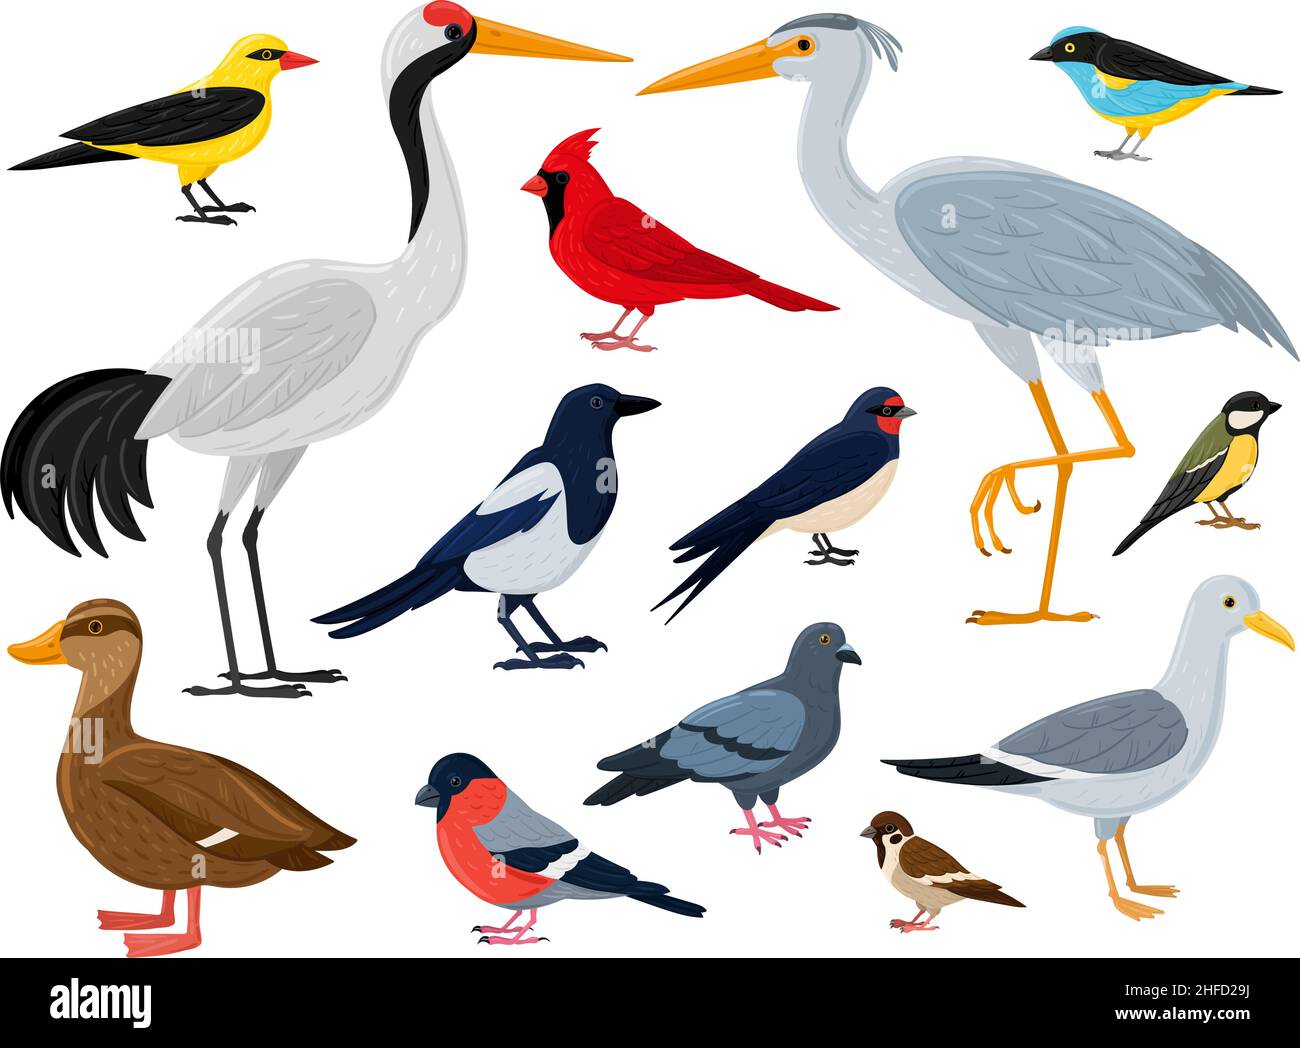 Cartoon flying birds, crane, red cardinal duck and seagull. City, woods and marine winged animals characters vector illustration set. European fauna Stock Vector